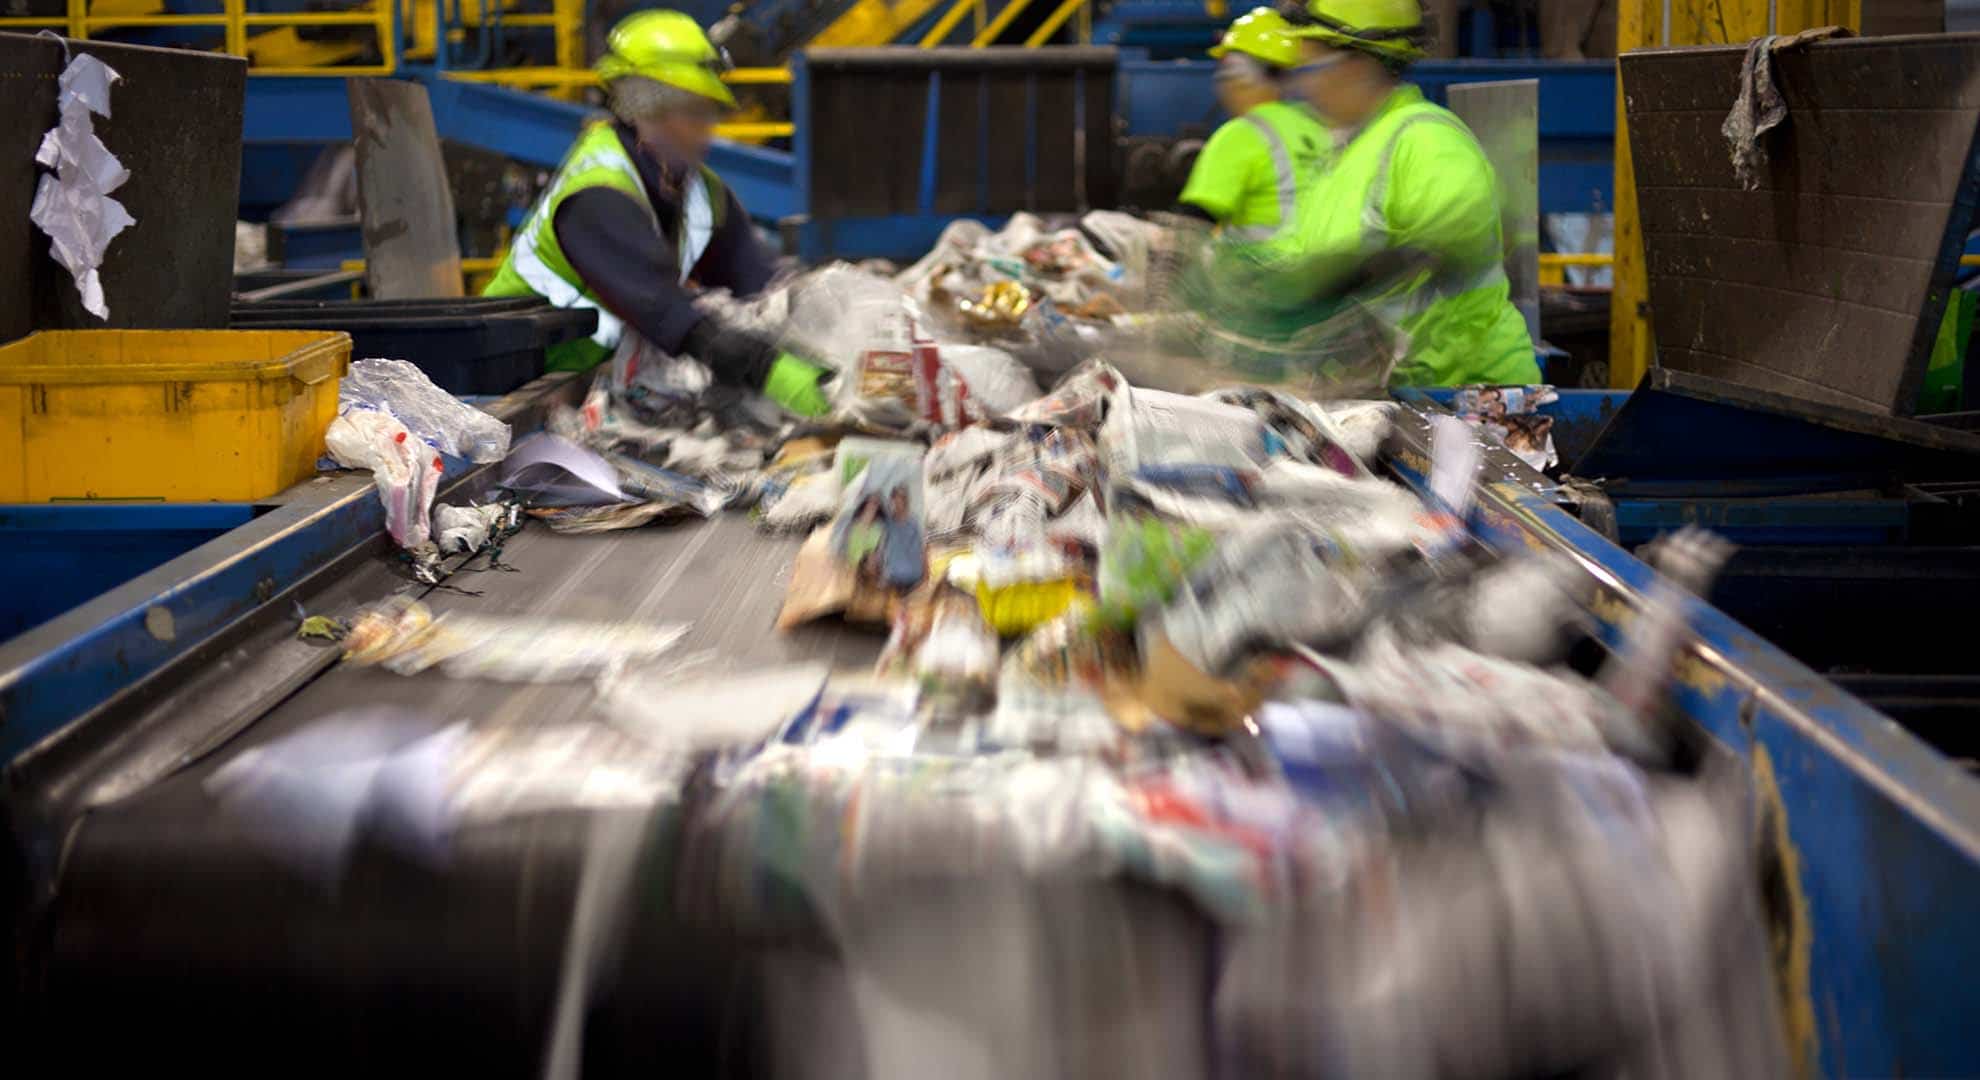 Photo of recycling on a conveyor belt in a materials recycling facility